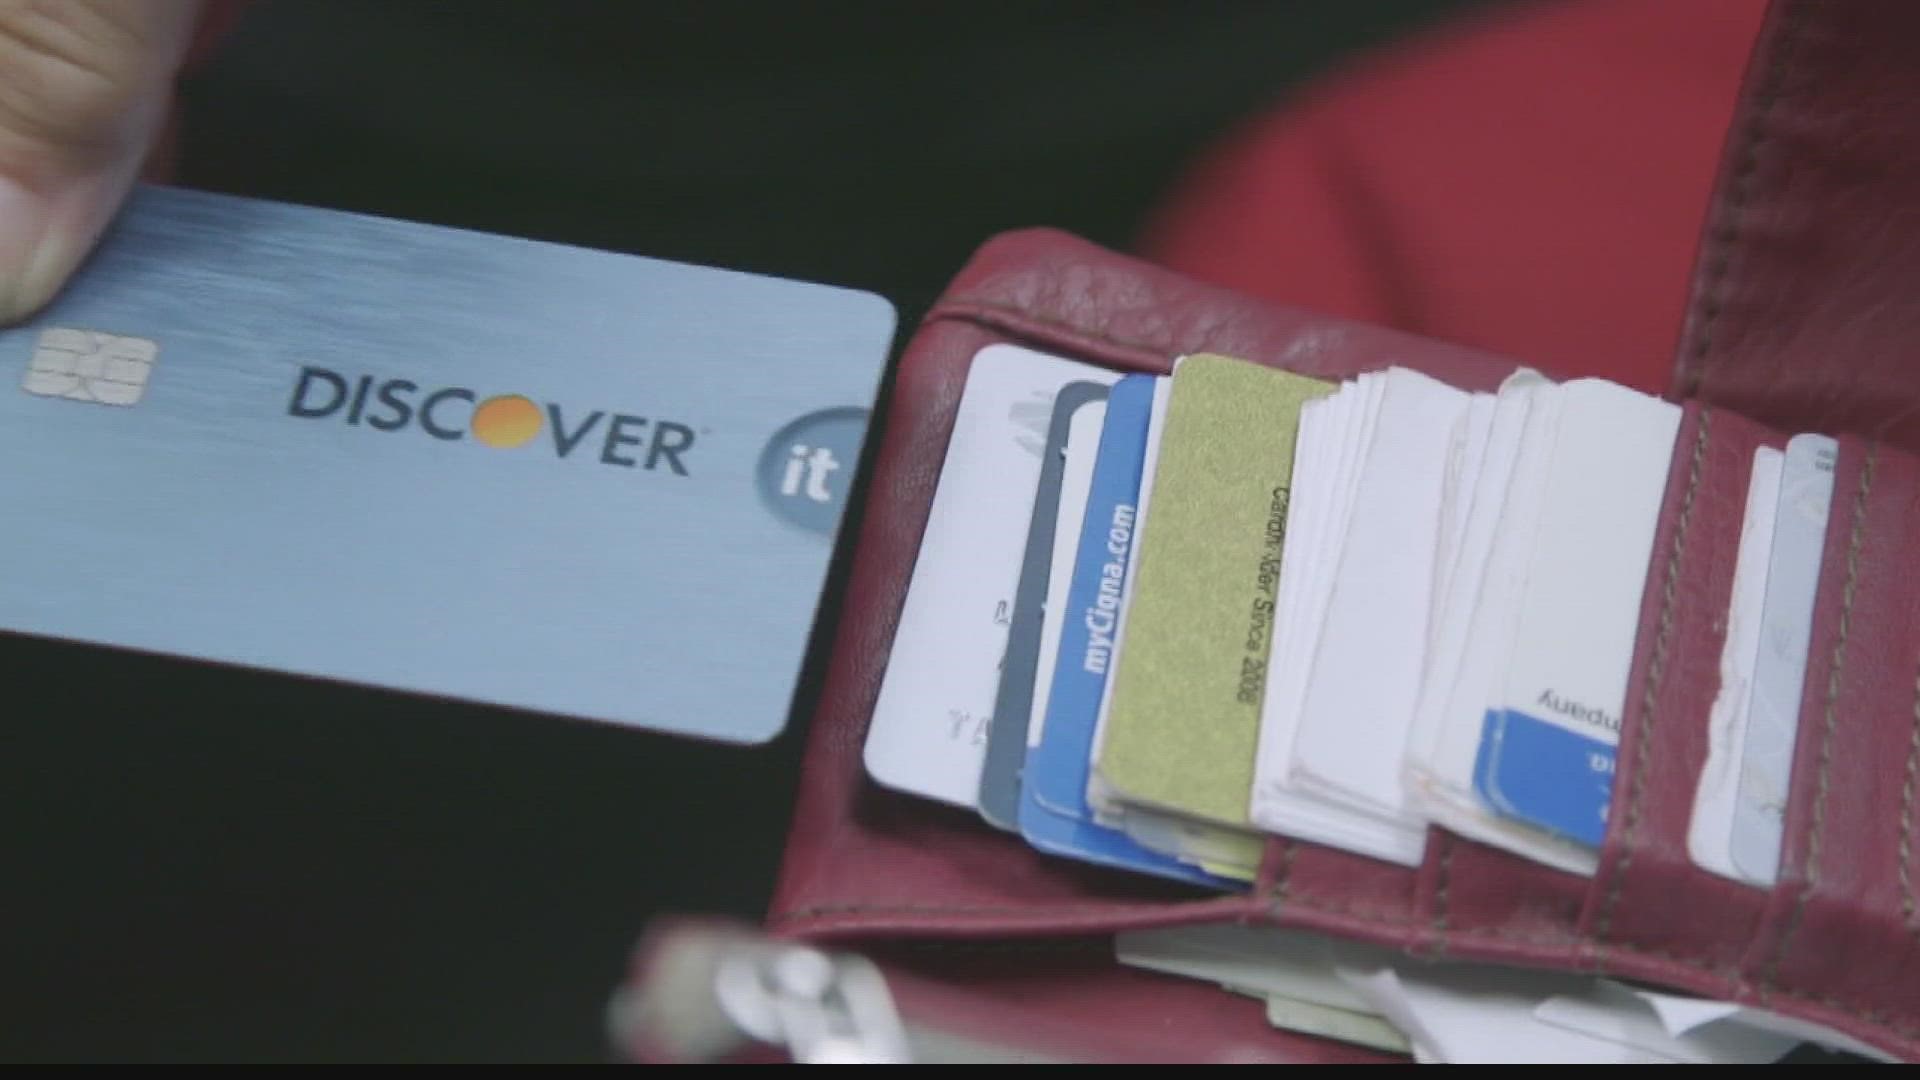 Consumer Reports shares some simple steps to make paying with apps more secure.